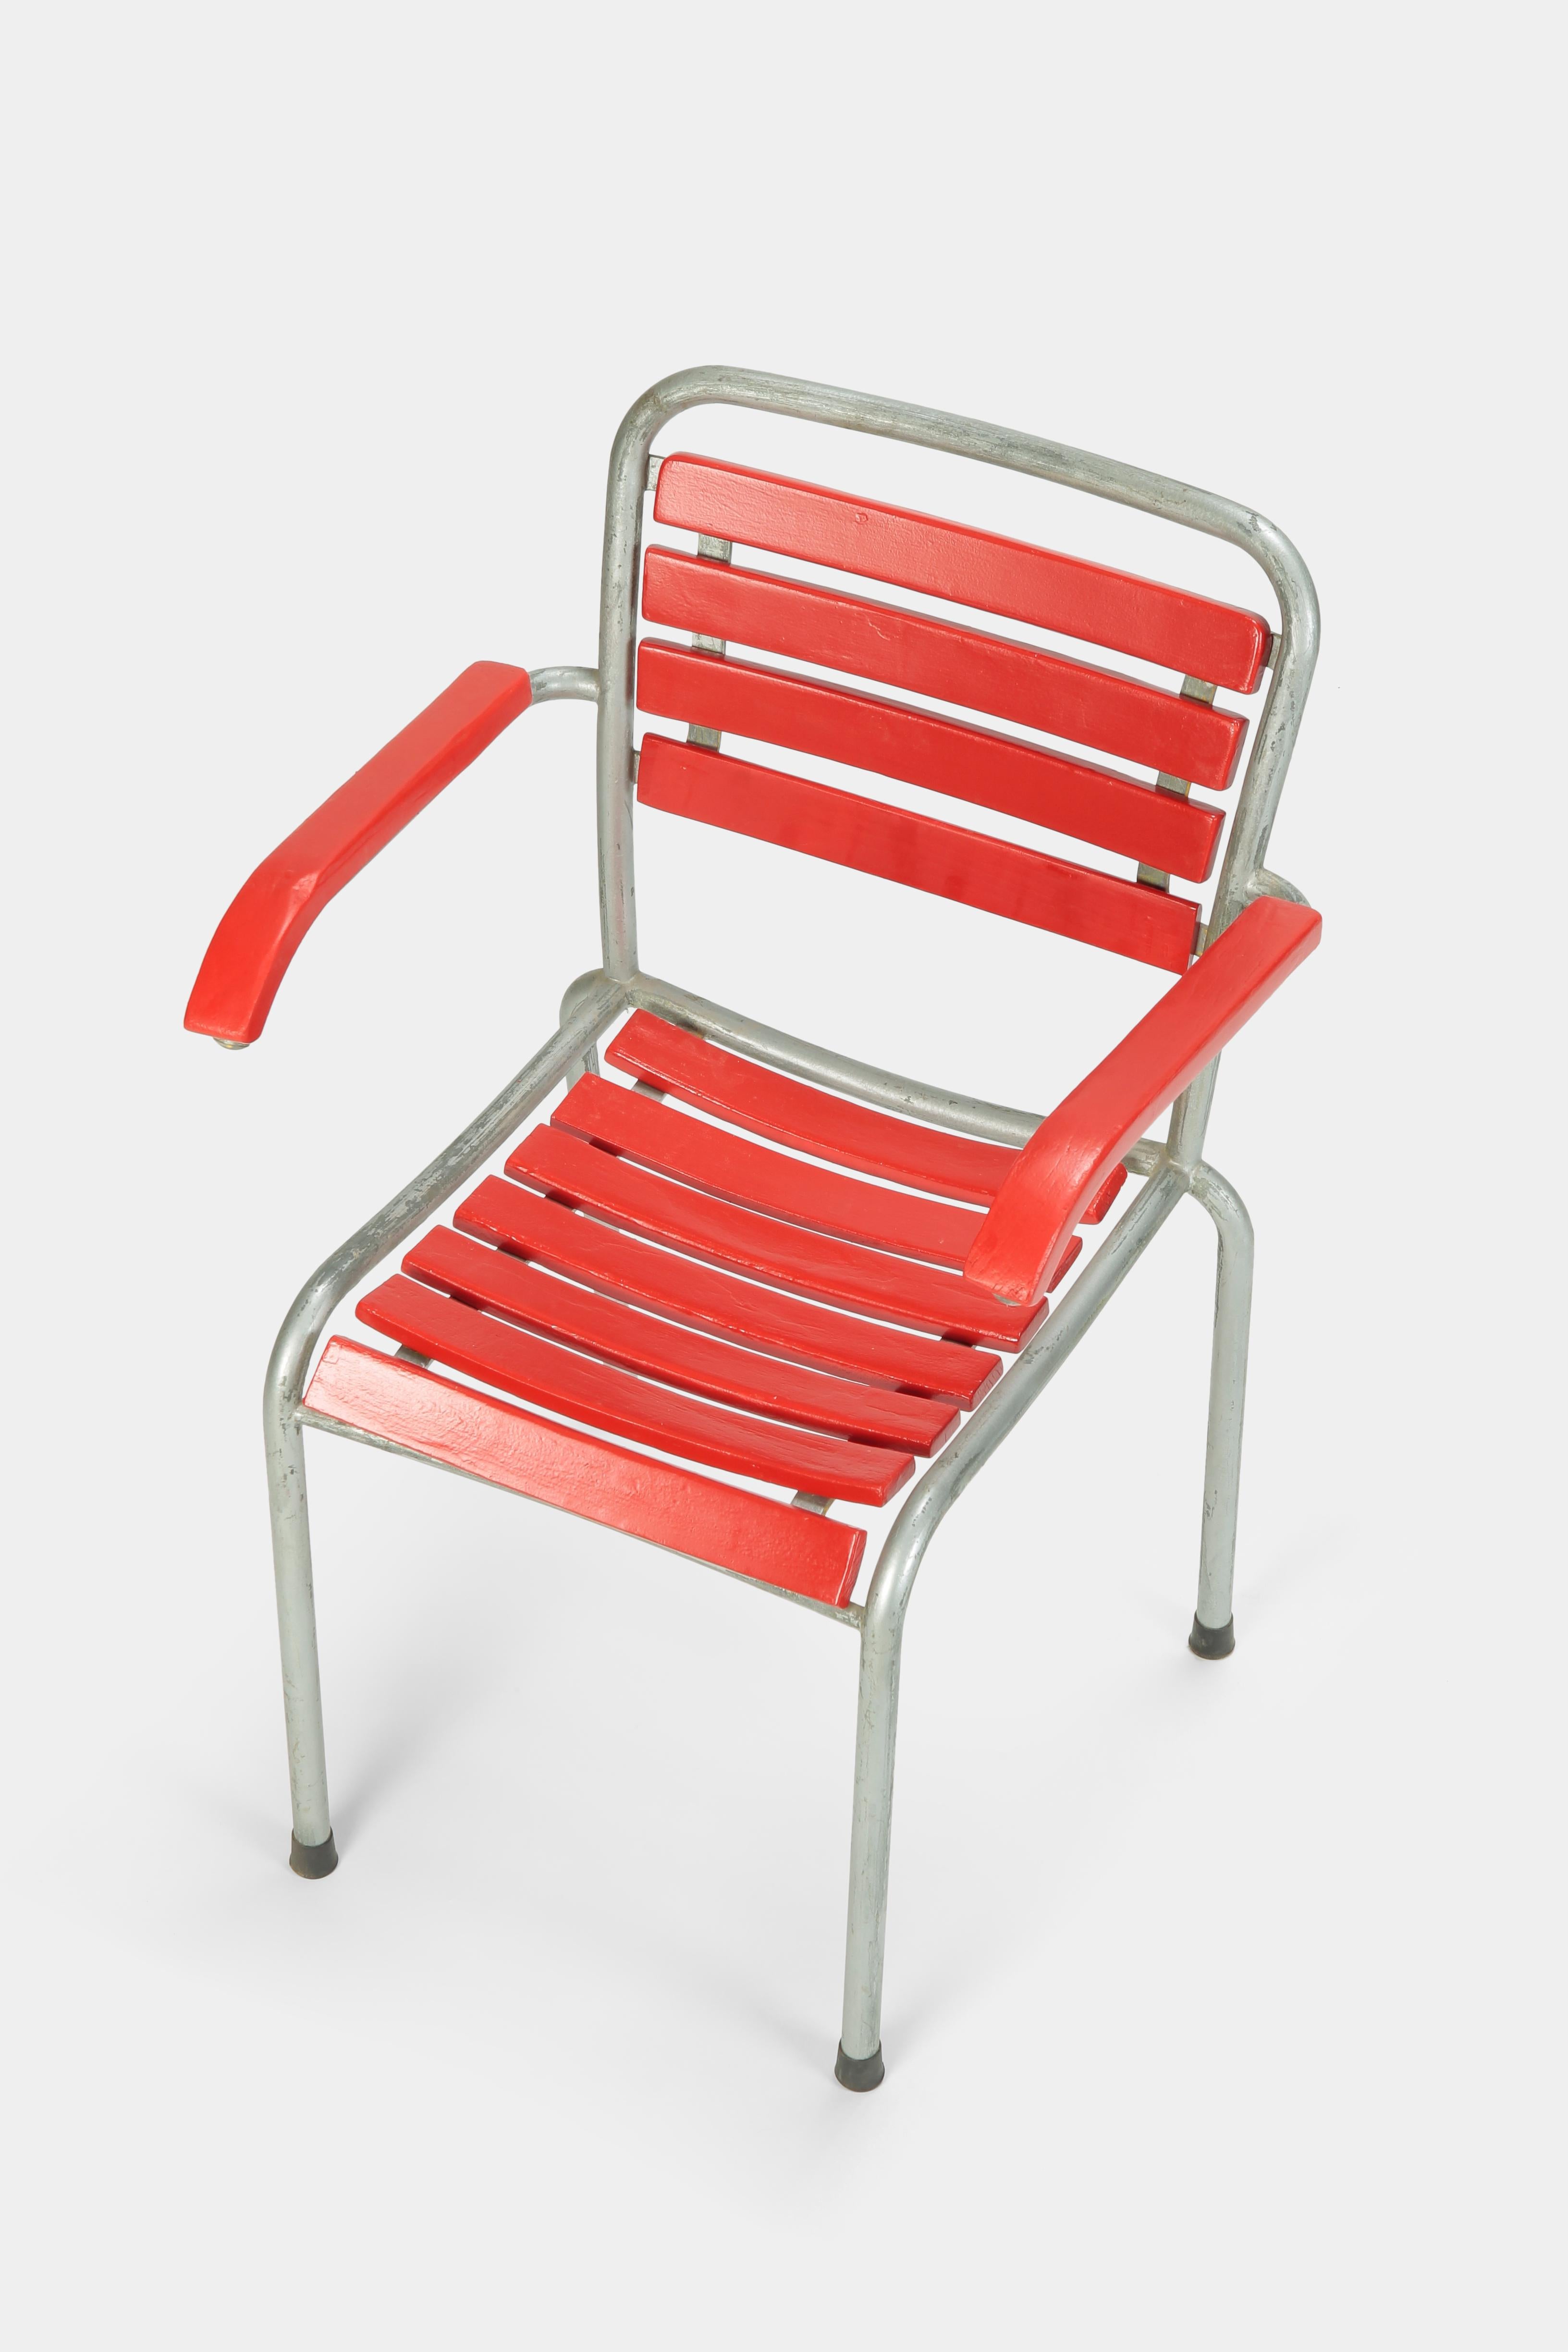 Red garden chair made by Bigla in the 1940s in Switzerland. Solid wood slats attached to a galvanized tubular steel frame. The wooden slats were freshly painted with the original color. Quintessential Swiss minimalist design, functional and